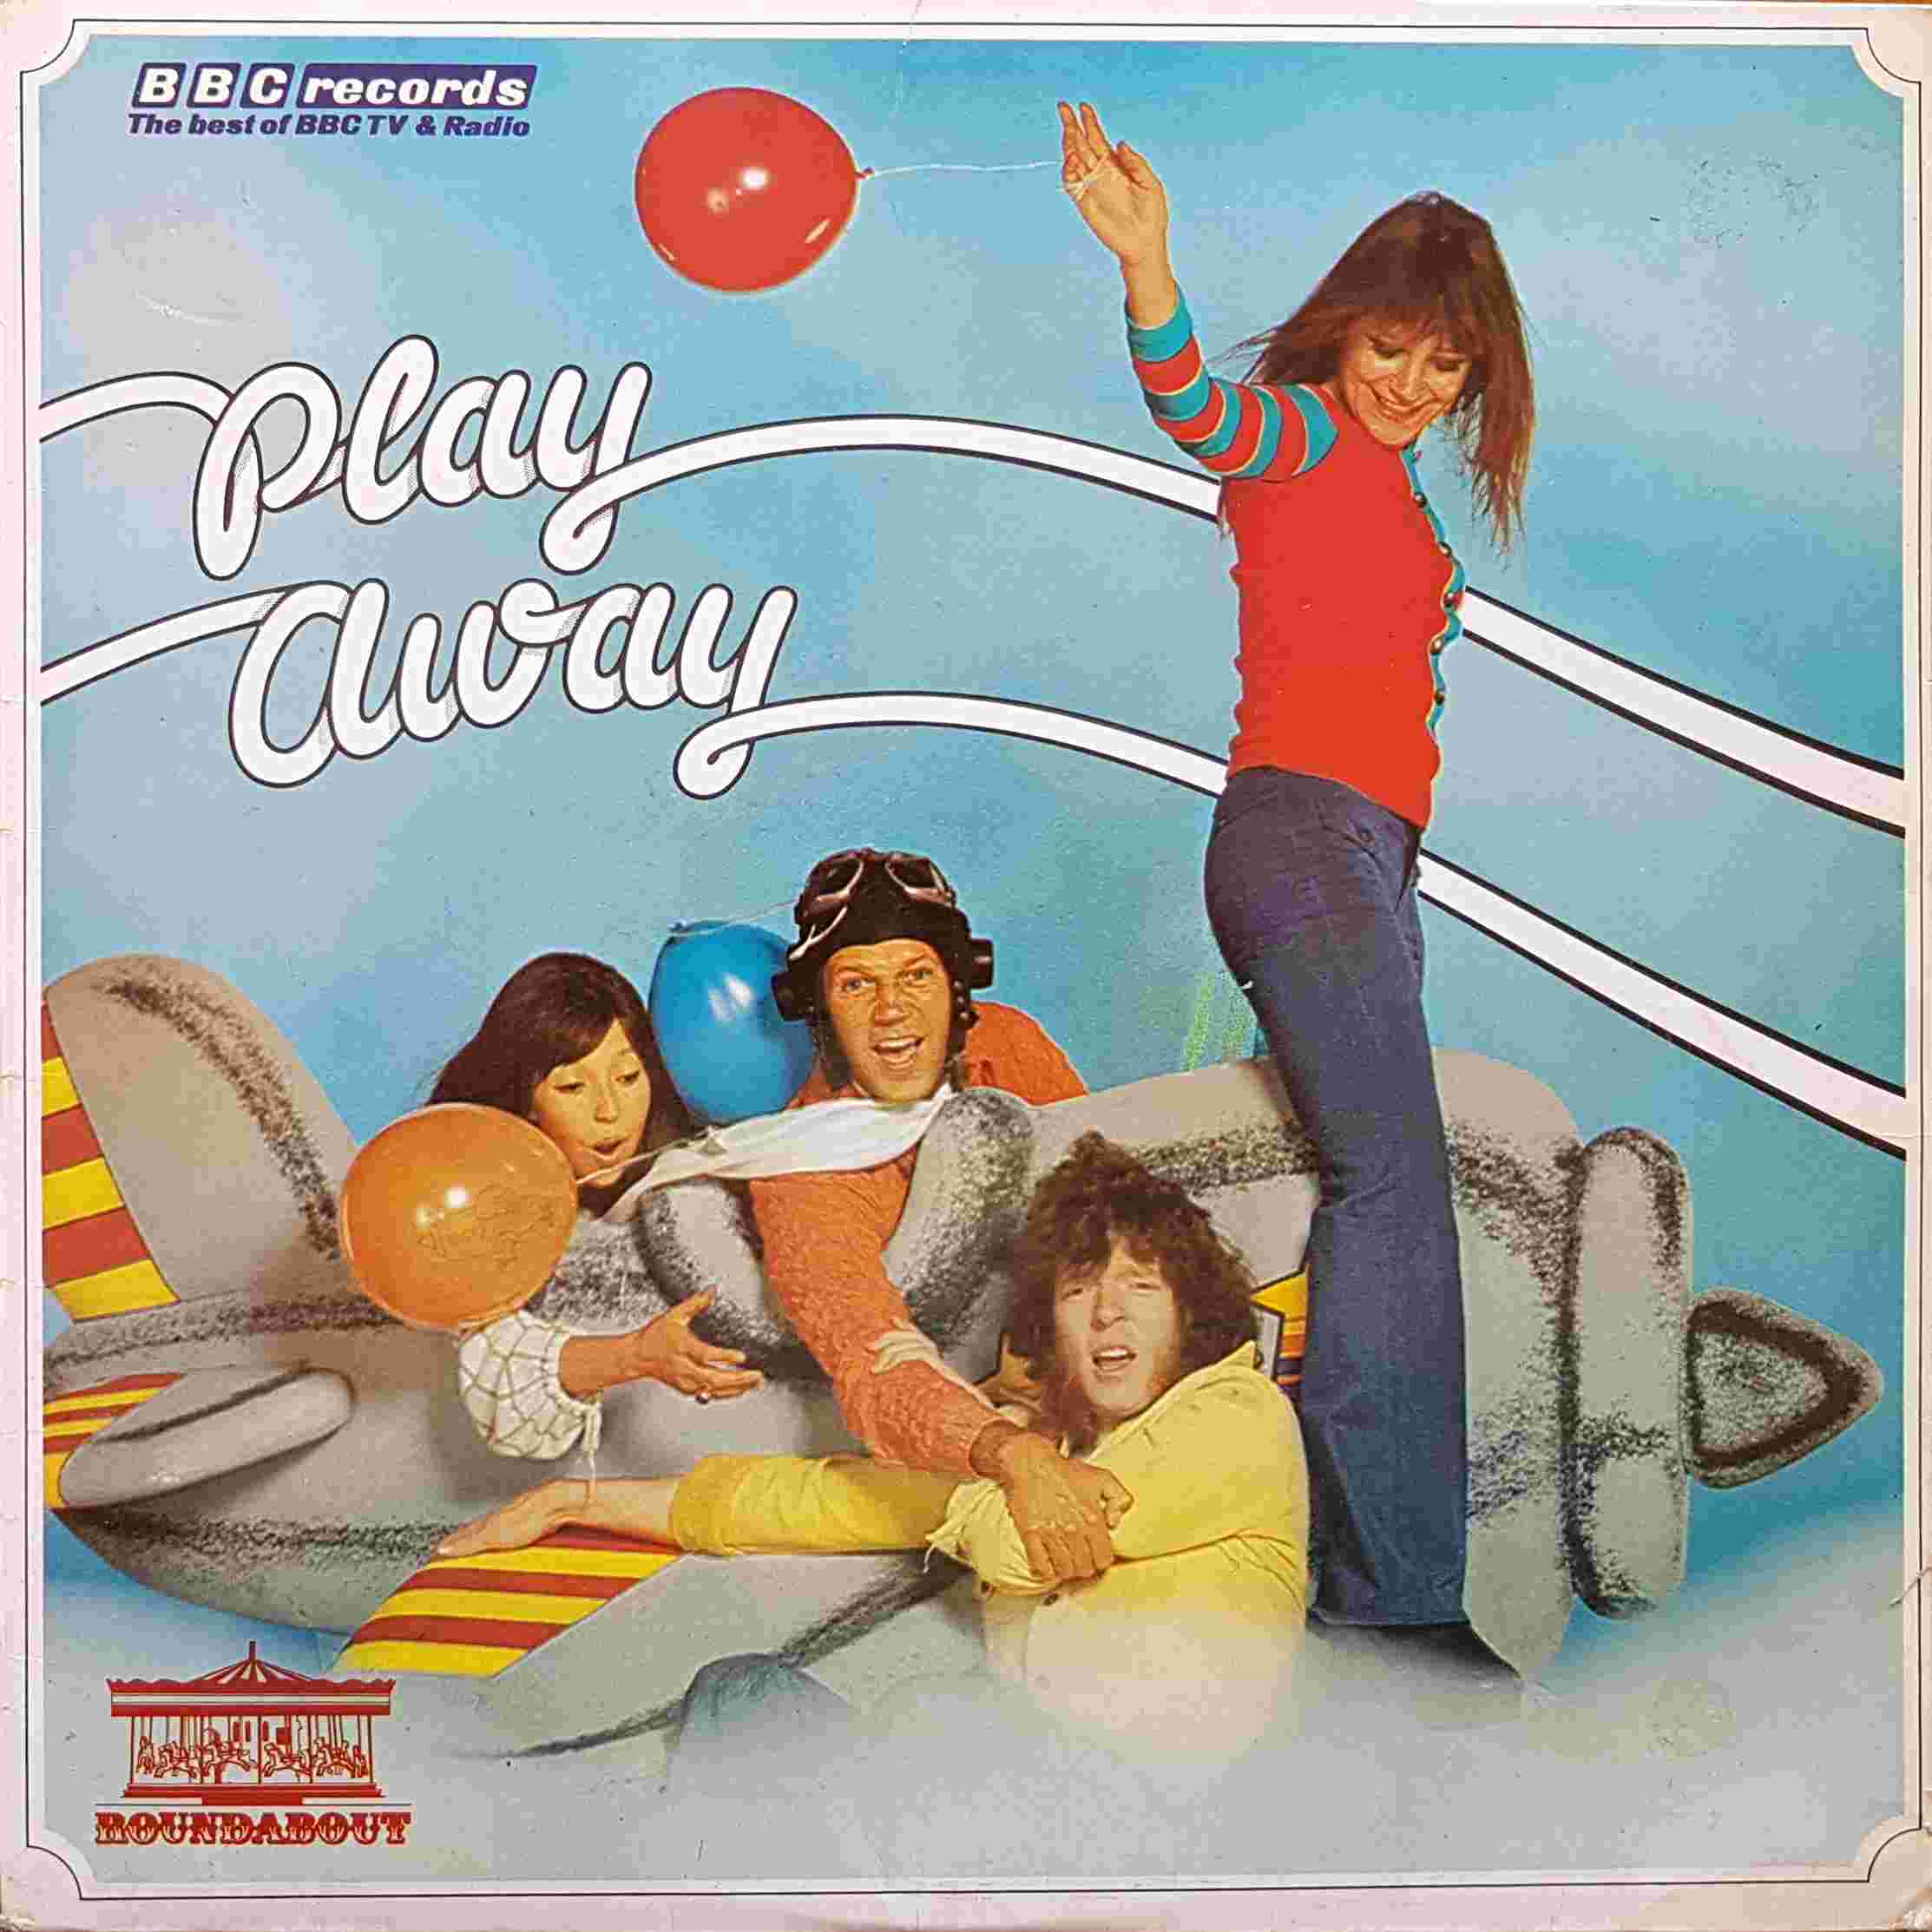 Picture of RBT 19 Play away by artist Various from the BBC albums - Records and Tapes library